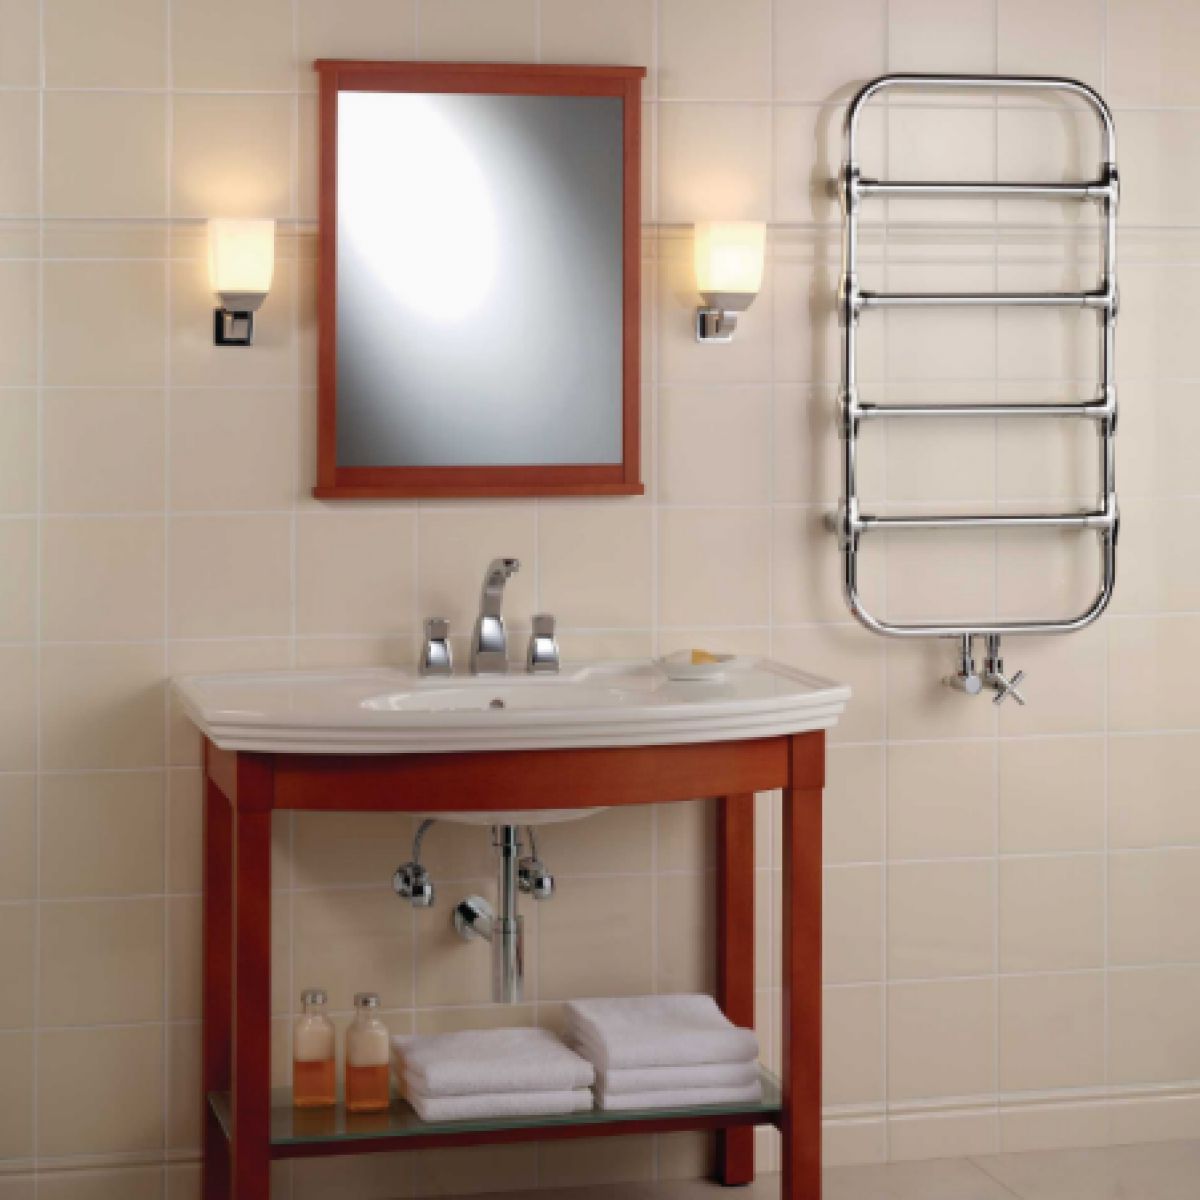 picture of a towel rail